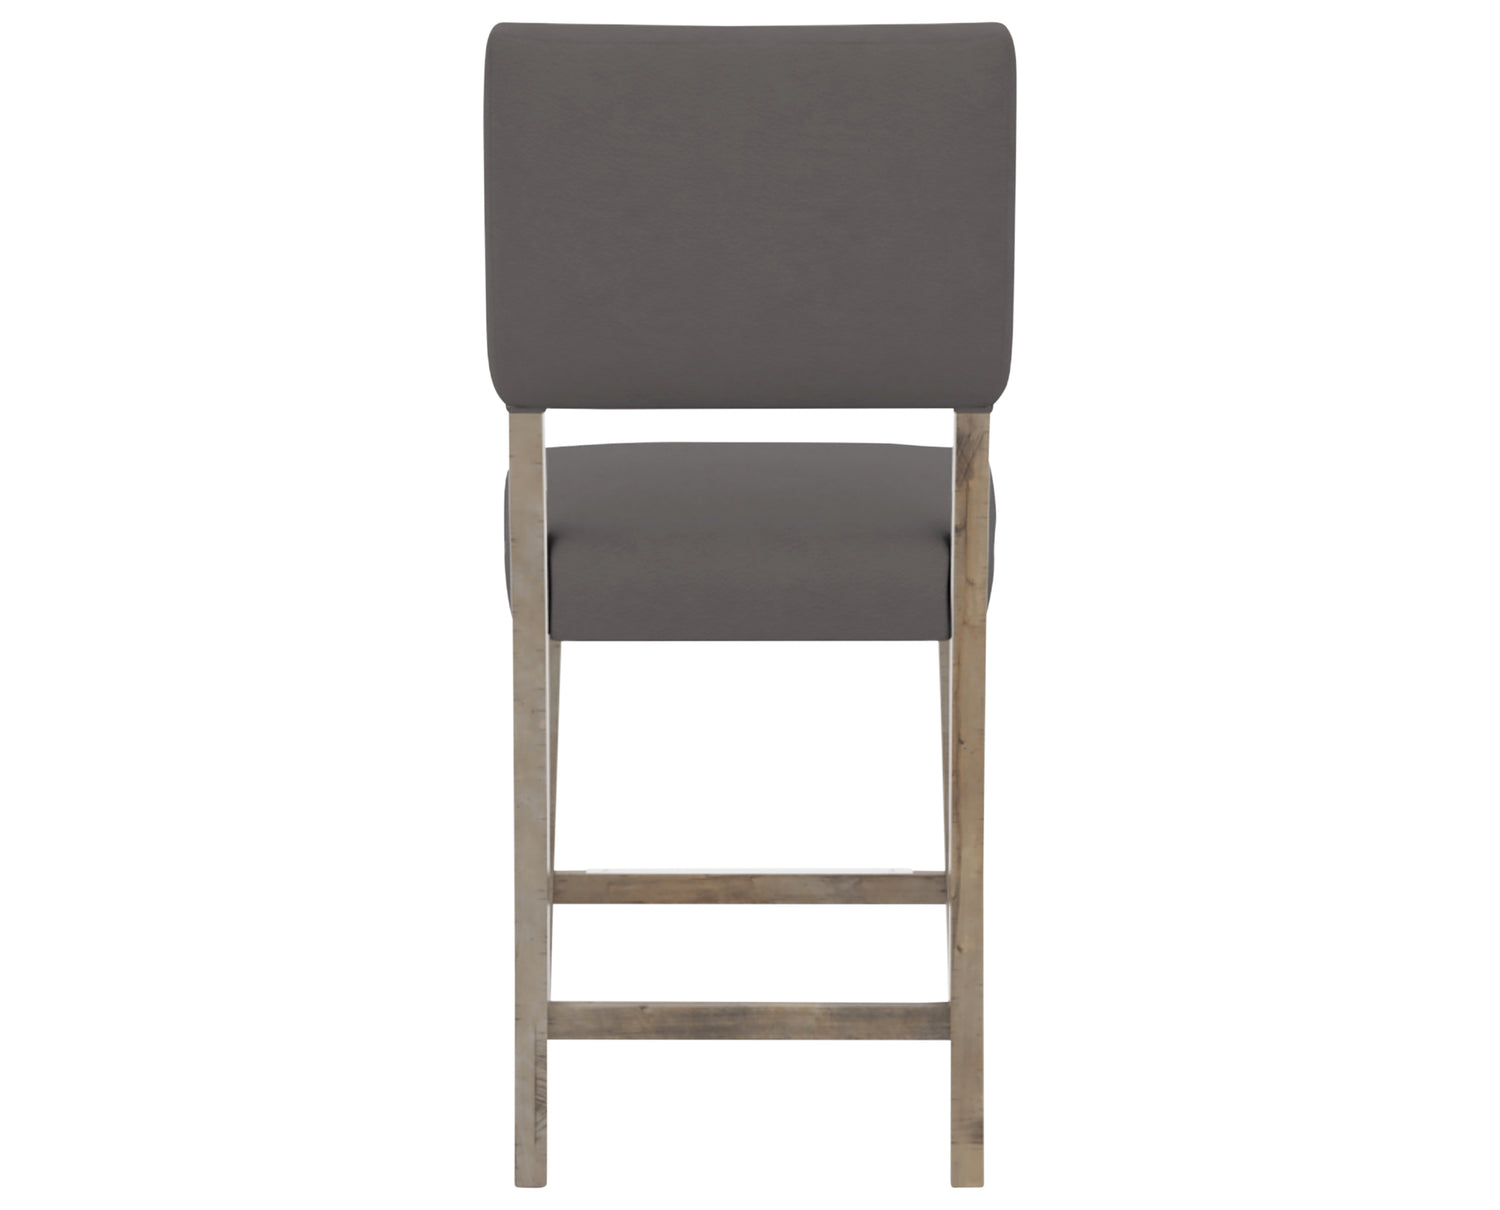 Shadow & Faux Leather XU | Canadel Loft Counter Stool 8051 | Valley Ridge Furniture